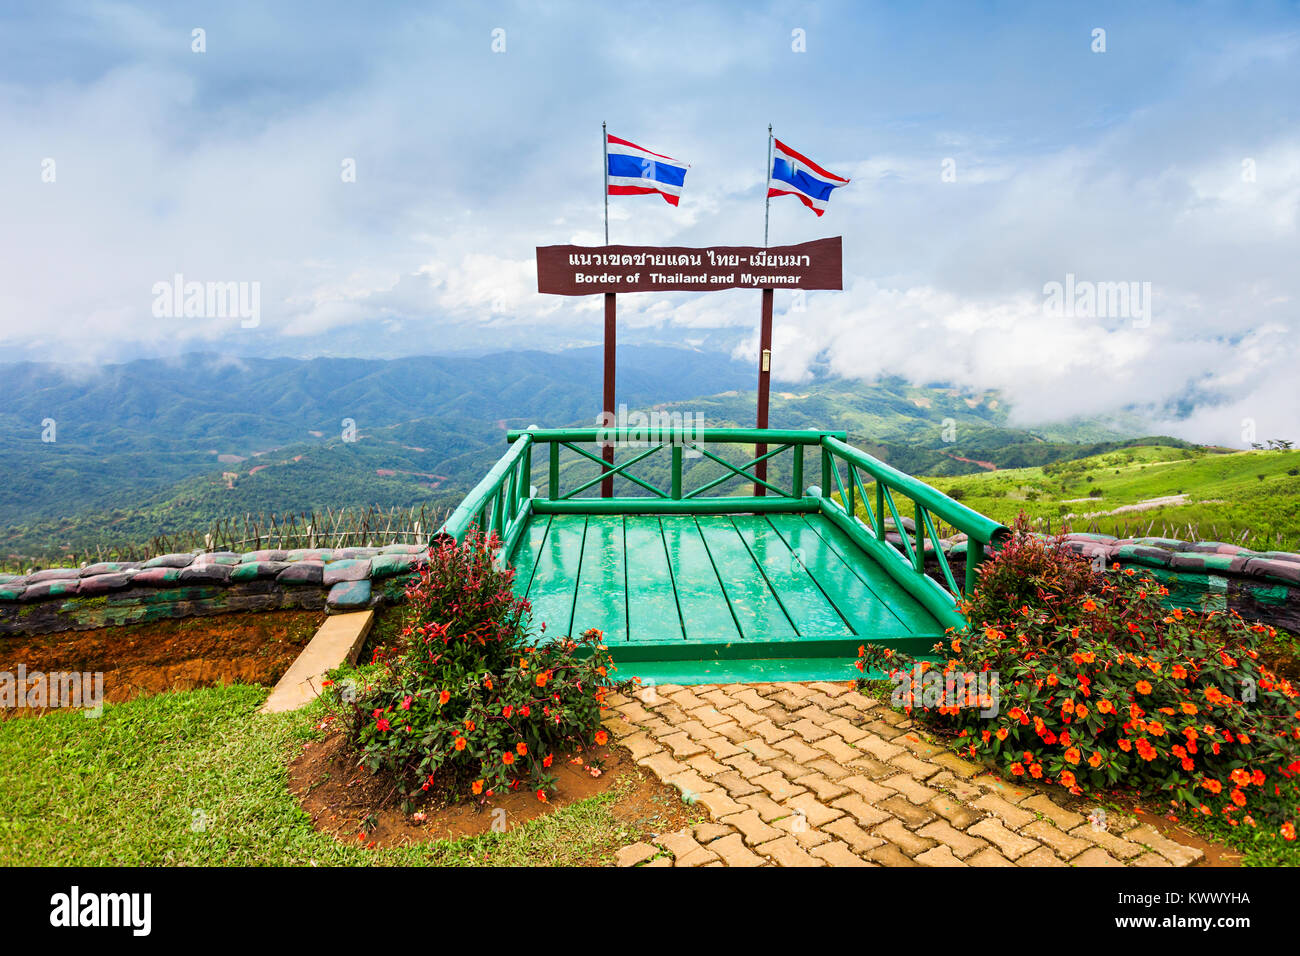 Sign of Thailand and Myanmar Border, Northern Thailand Stock Photo